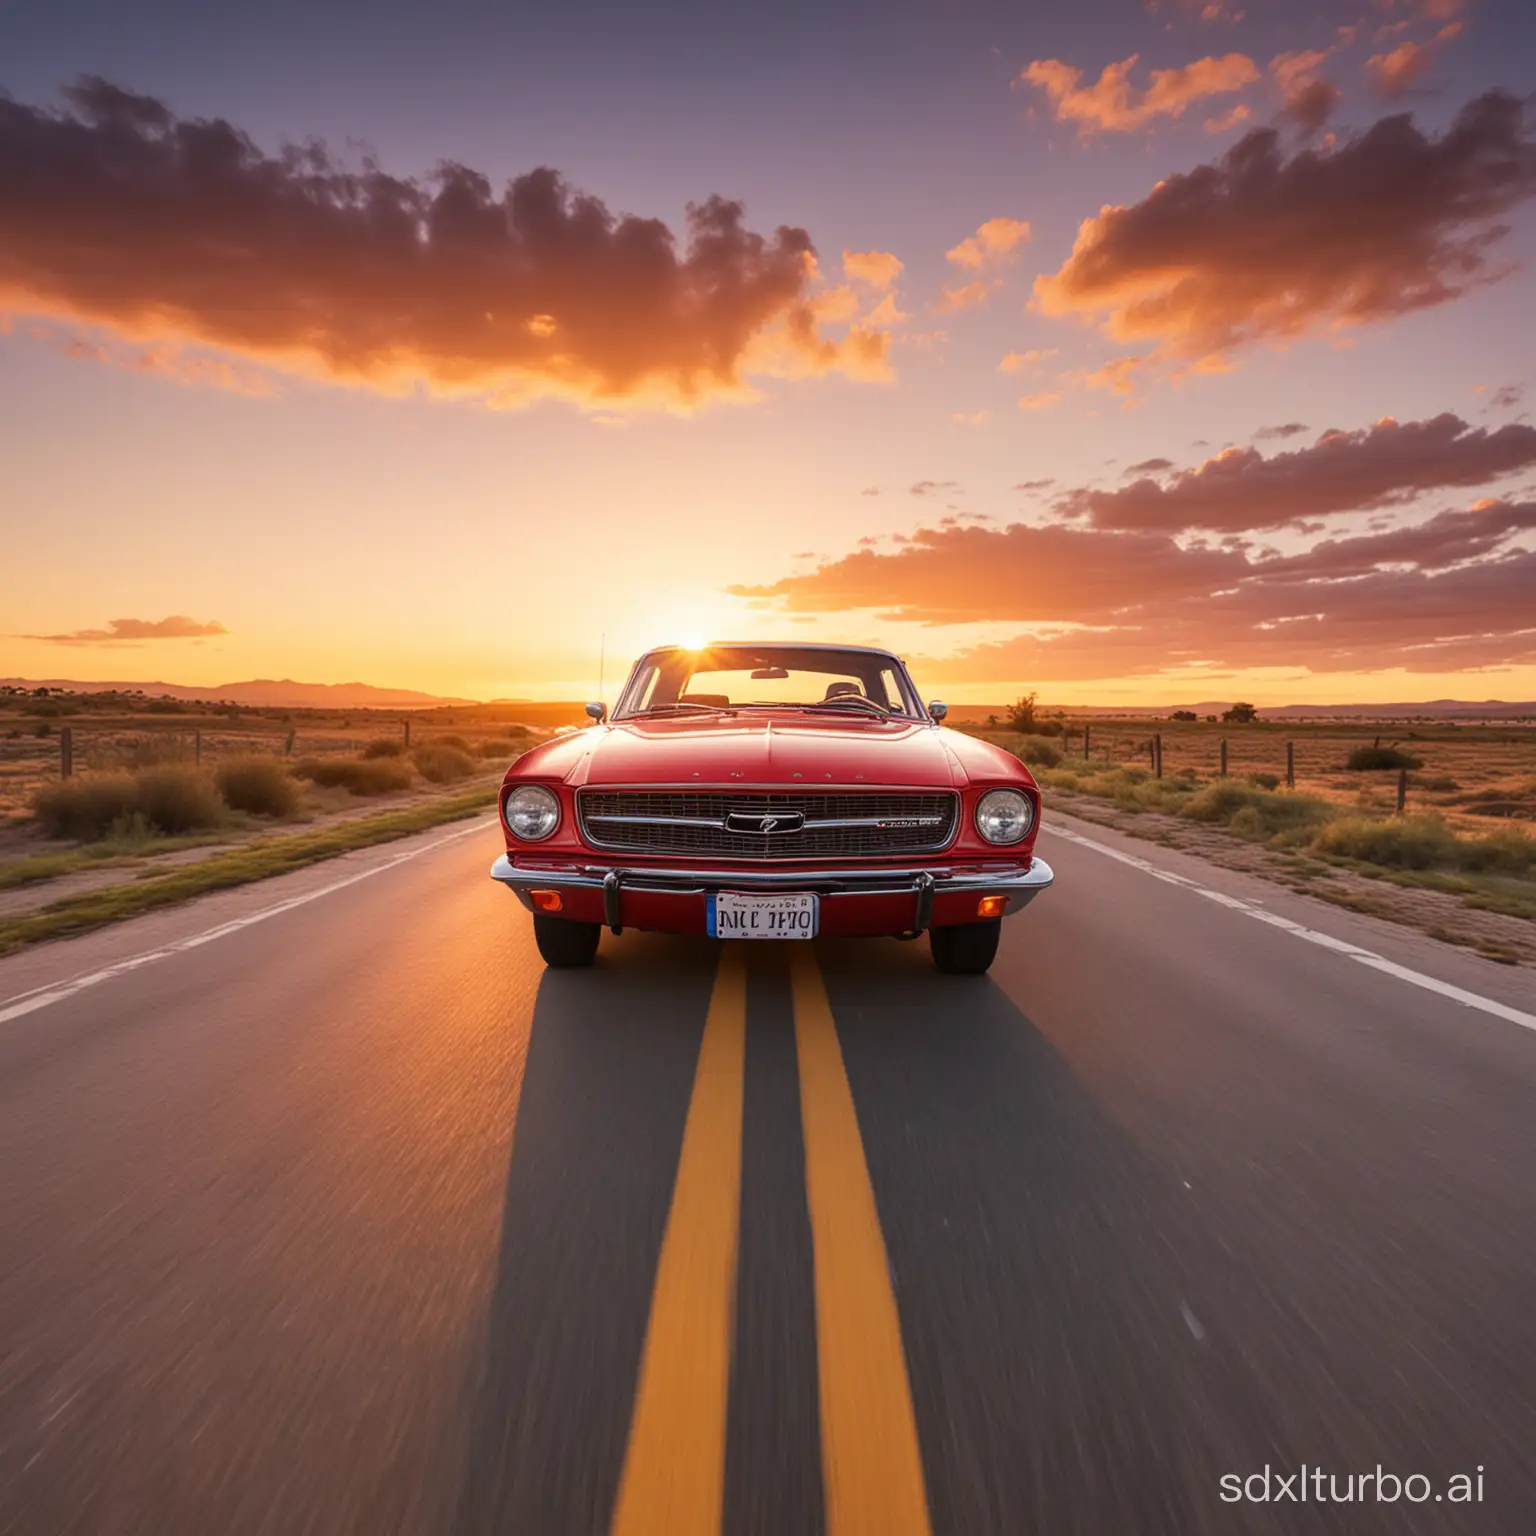 red car approaching the viewer with sunrise in the background